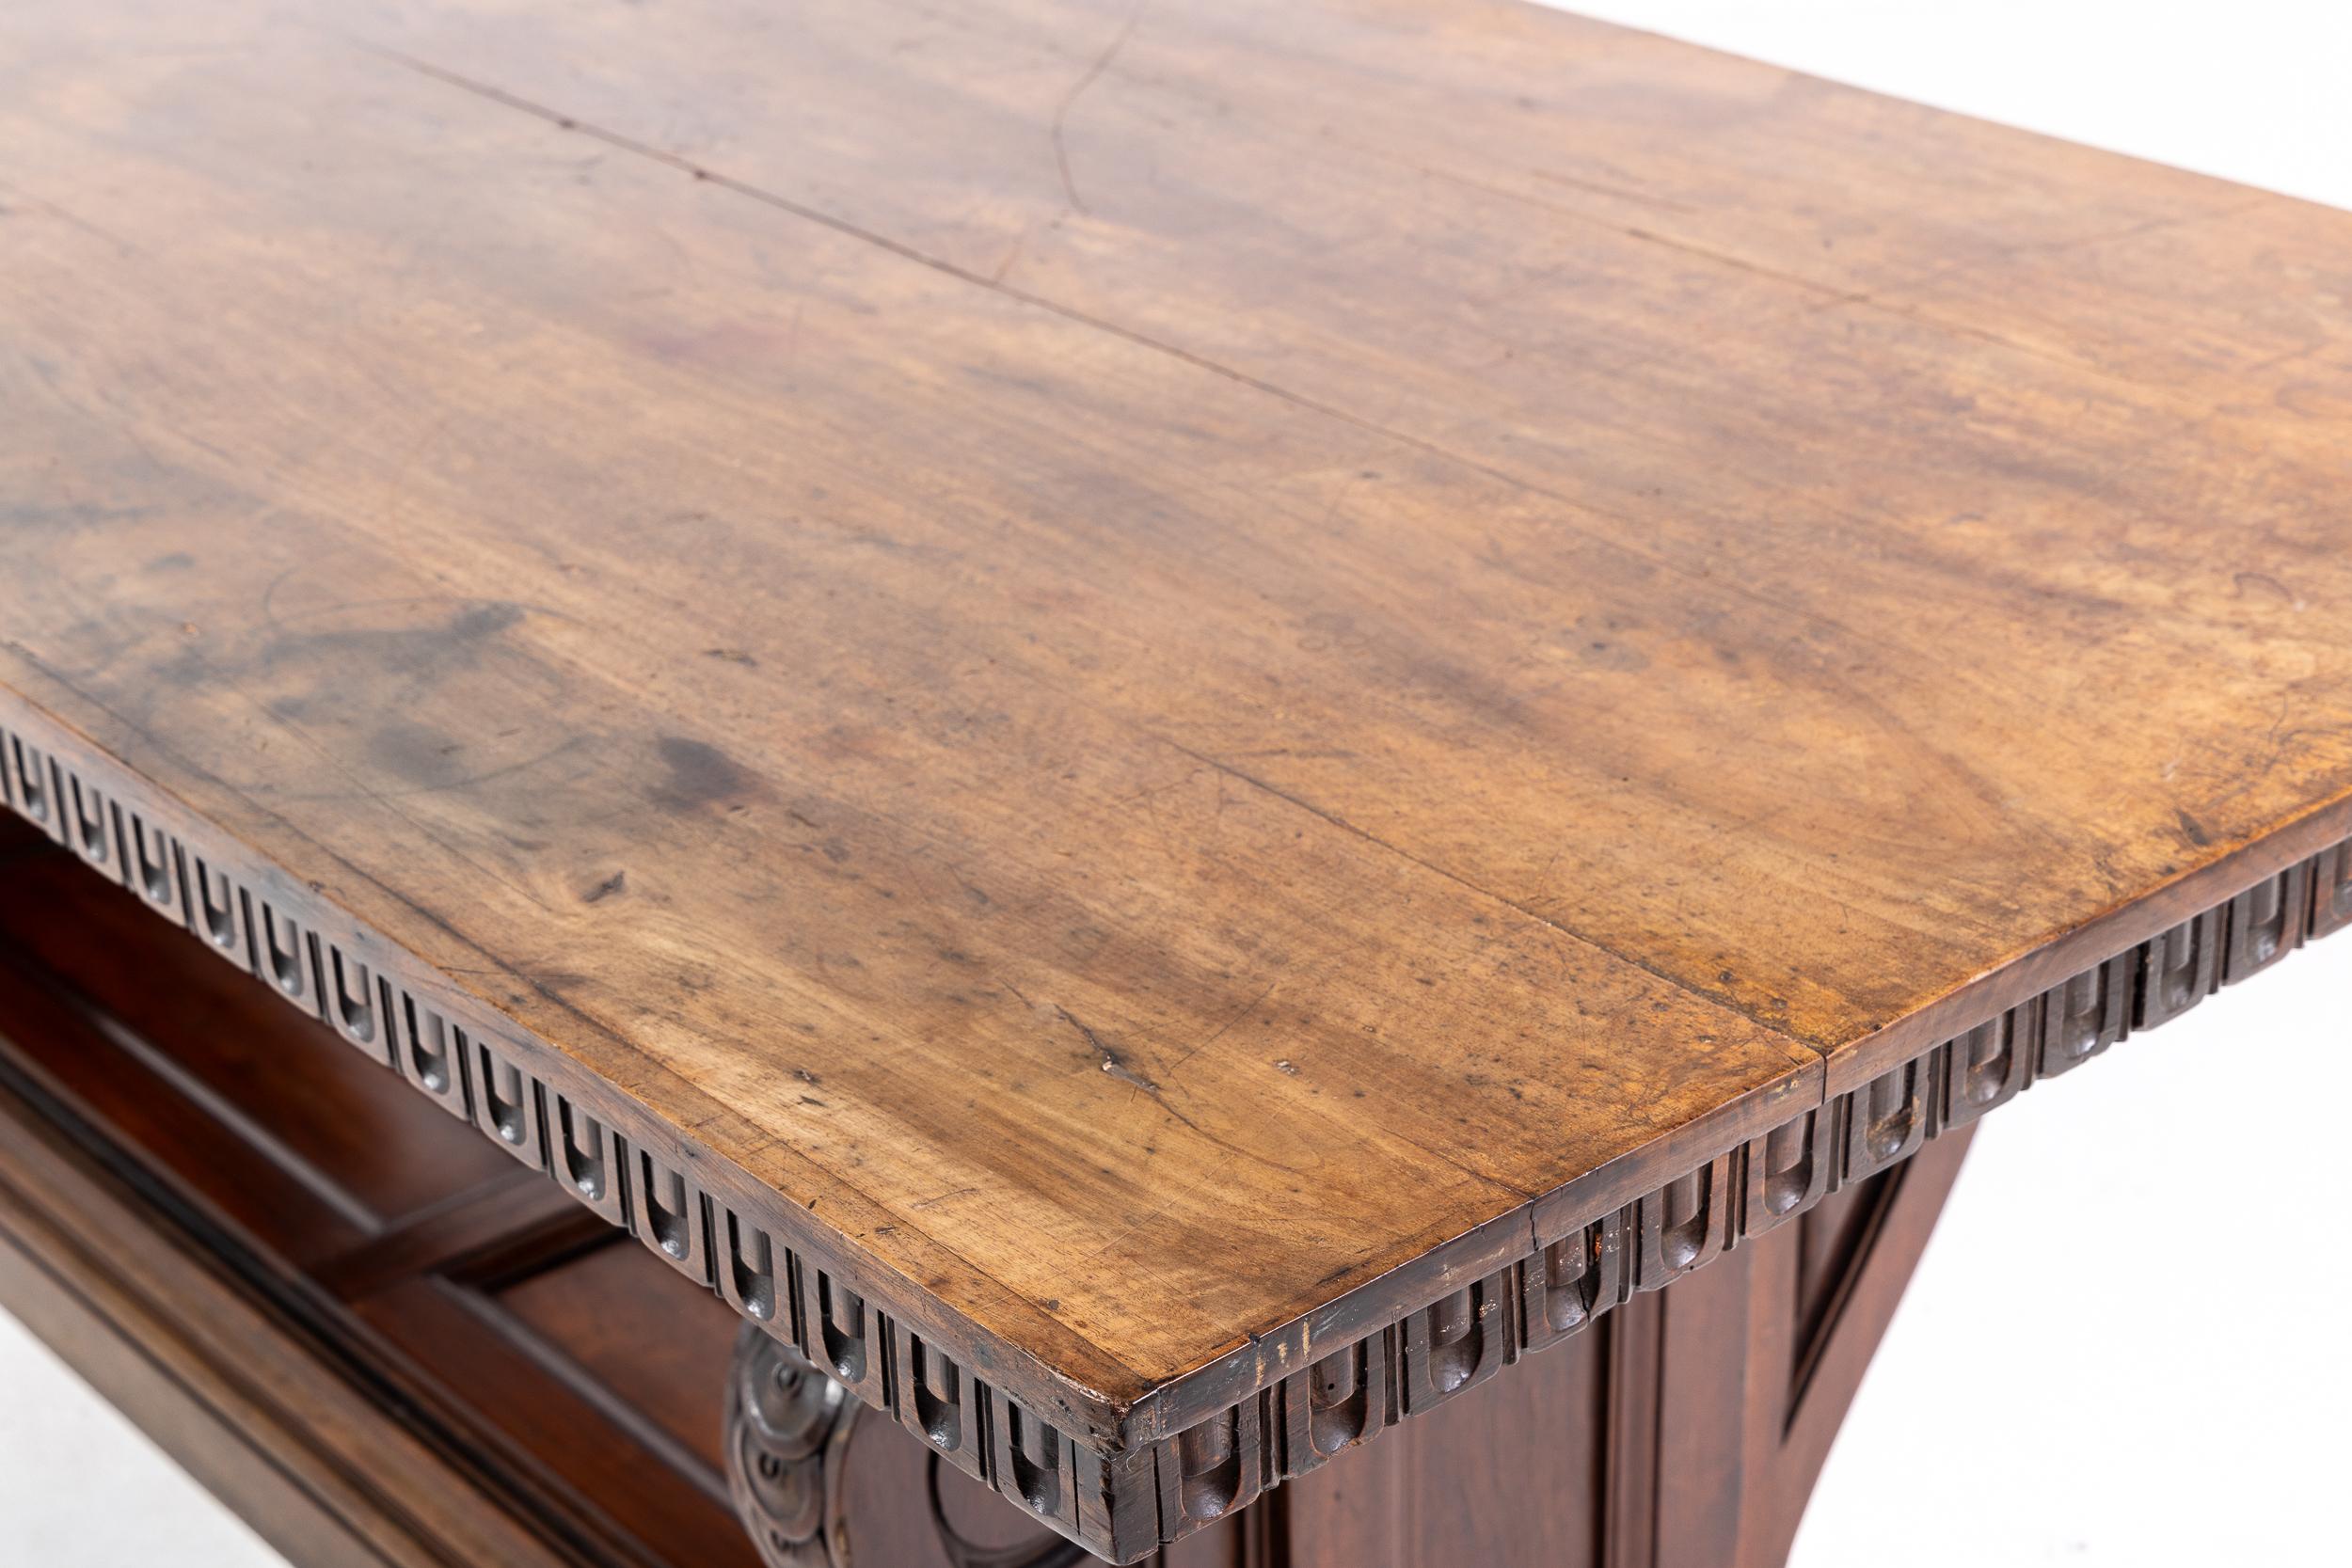 Monumental Four Metre 19th Century Italian Walnut Refectory Table For Sale 5